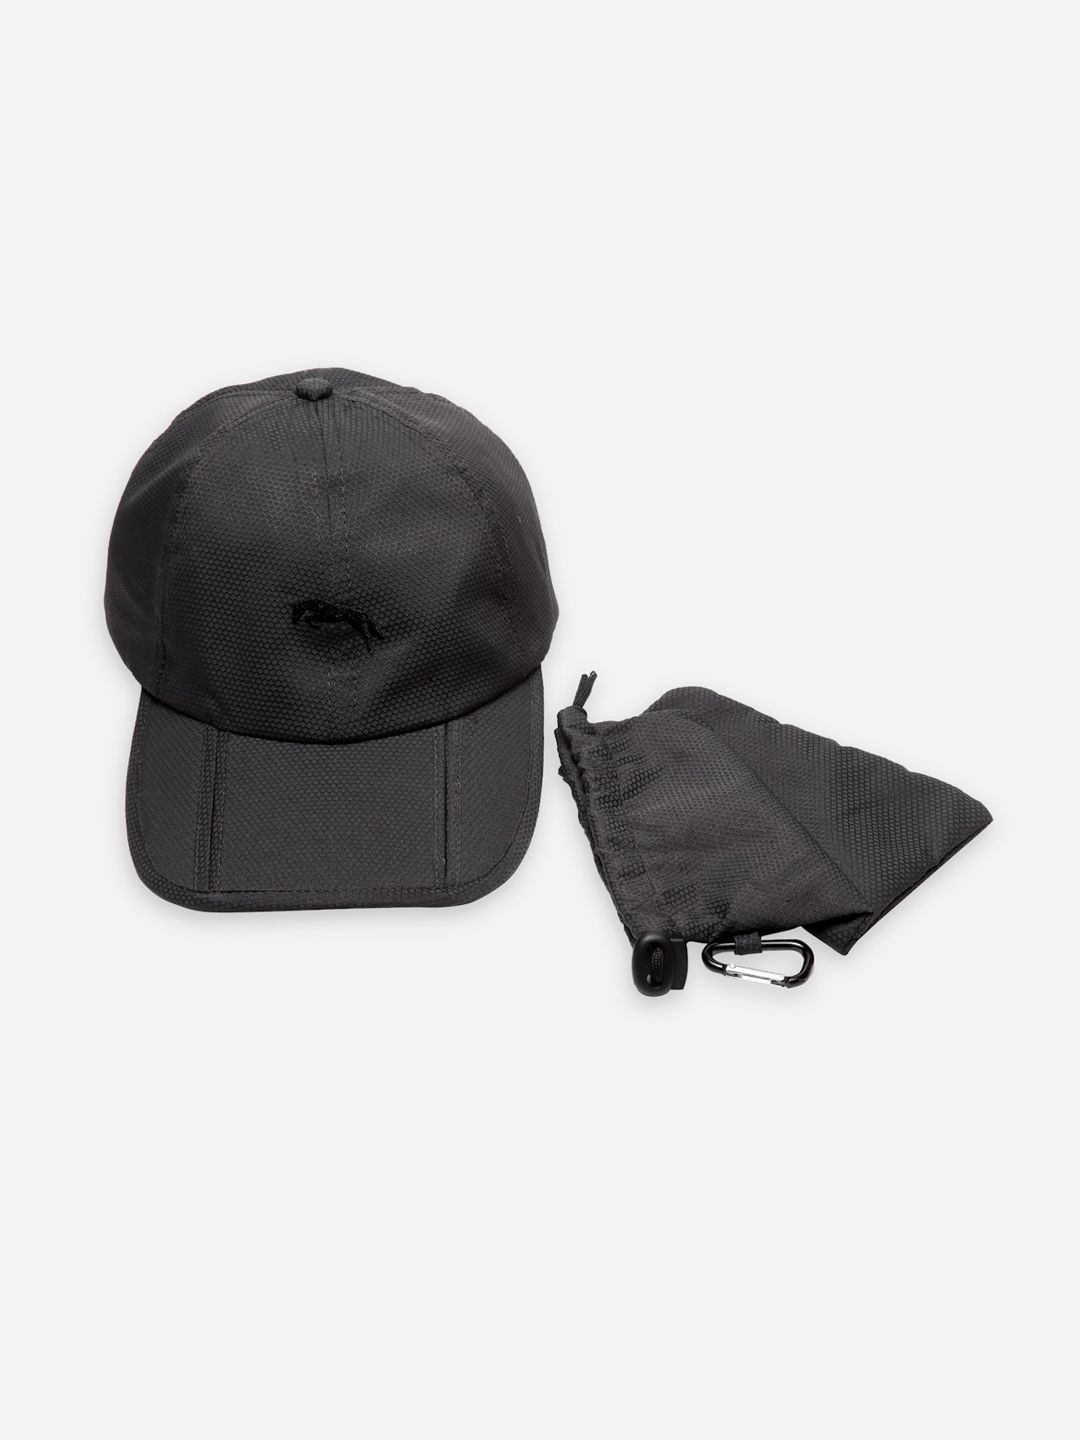 JUMP USA Unisex Charcoal Caps Price in India